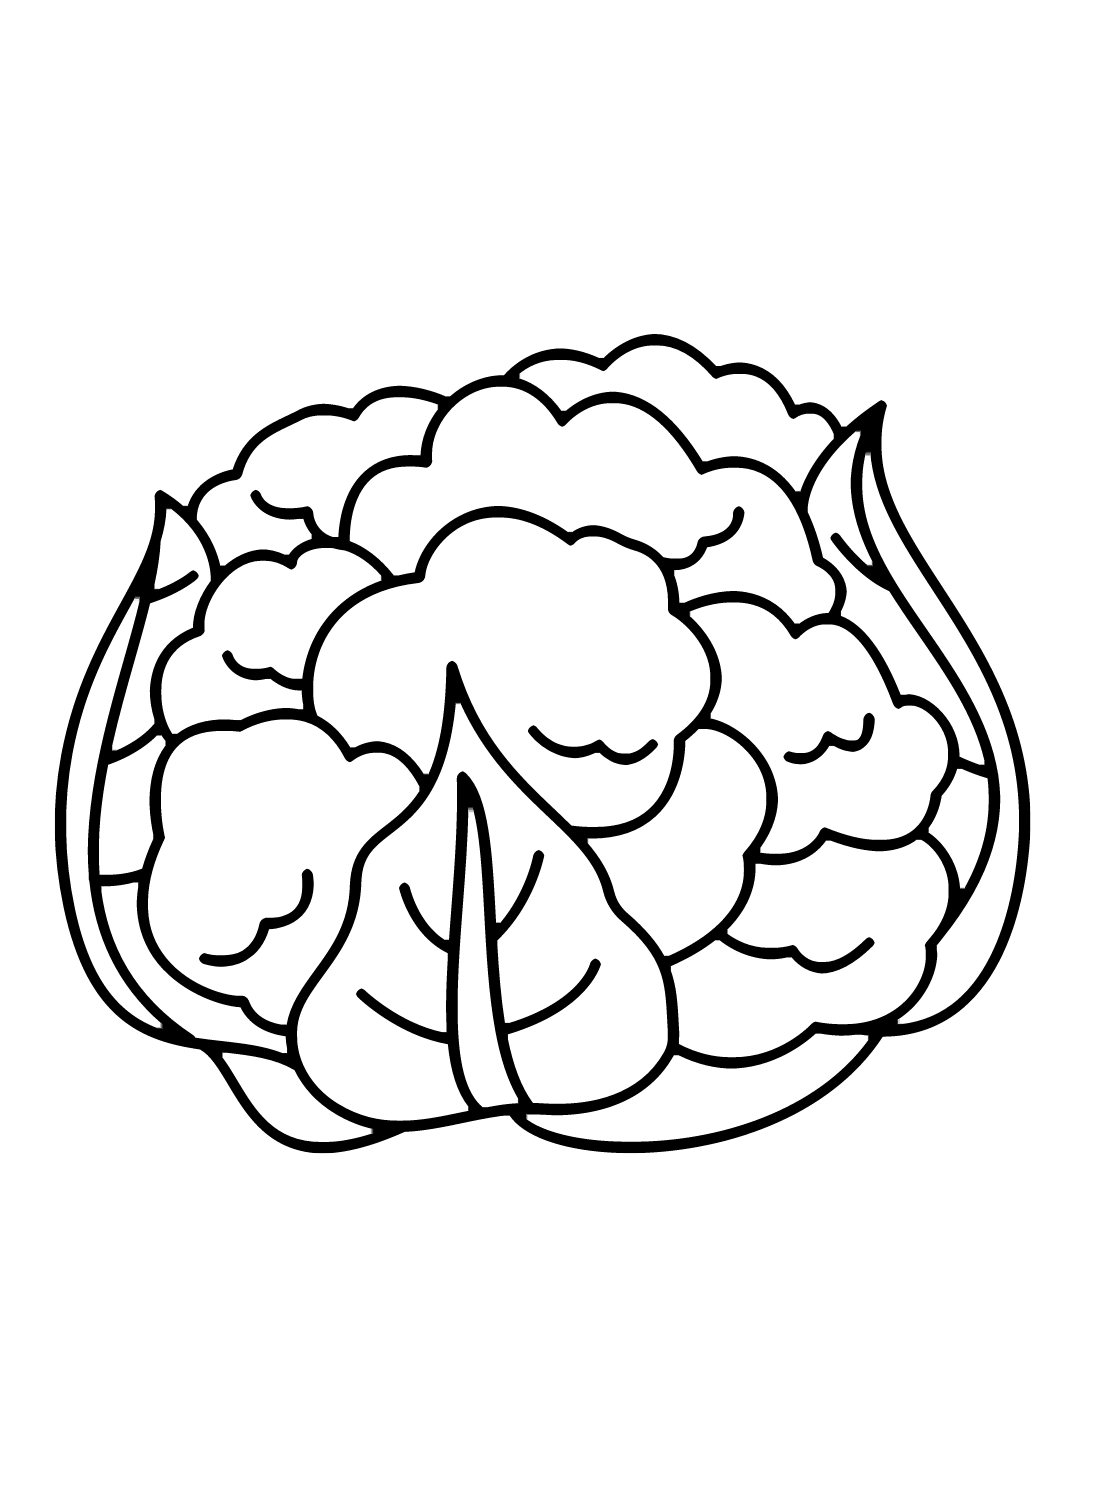 Cauliflower Images Coloring Page